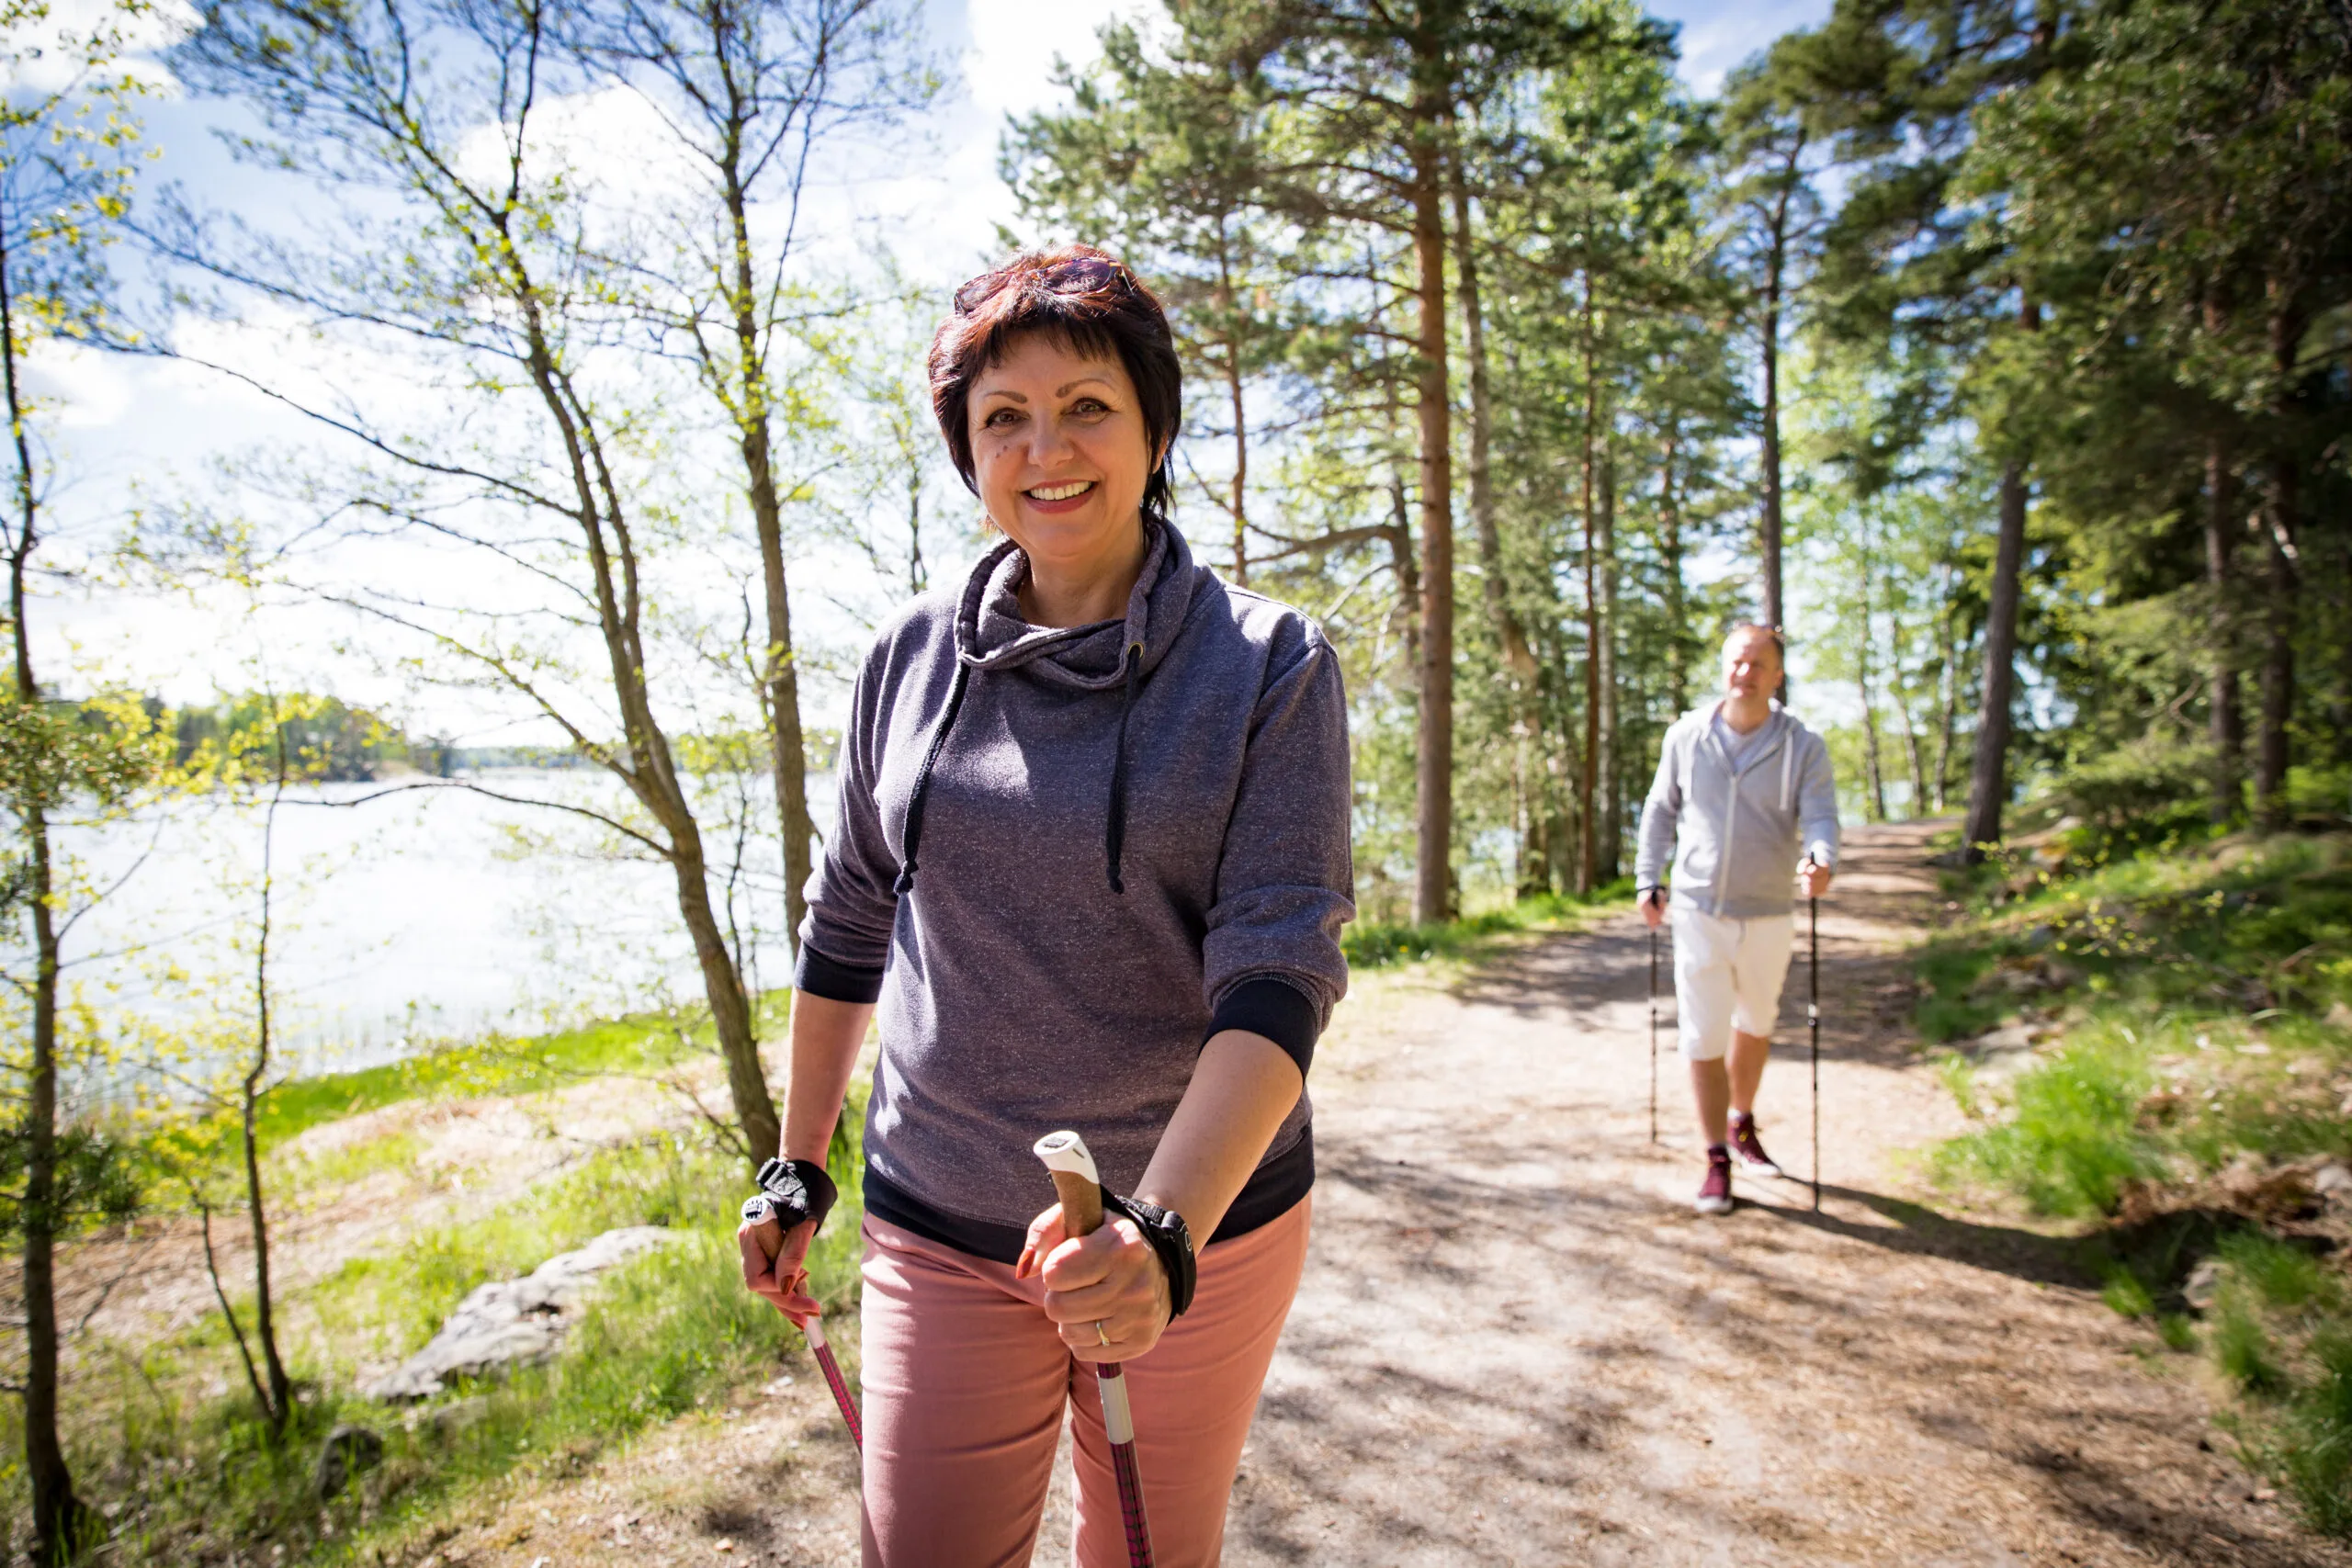 Summer sport in Finland - nordic walking. Man and mature woman hiking in green sunny forest. Active people outdoors. Scenic peaceful Finnish summer landscape.